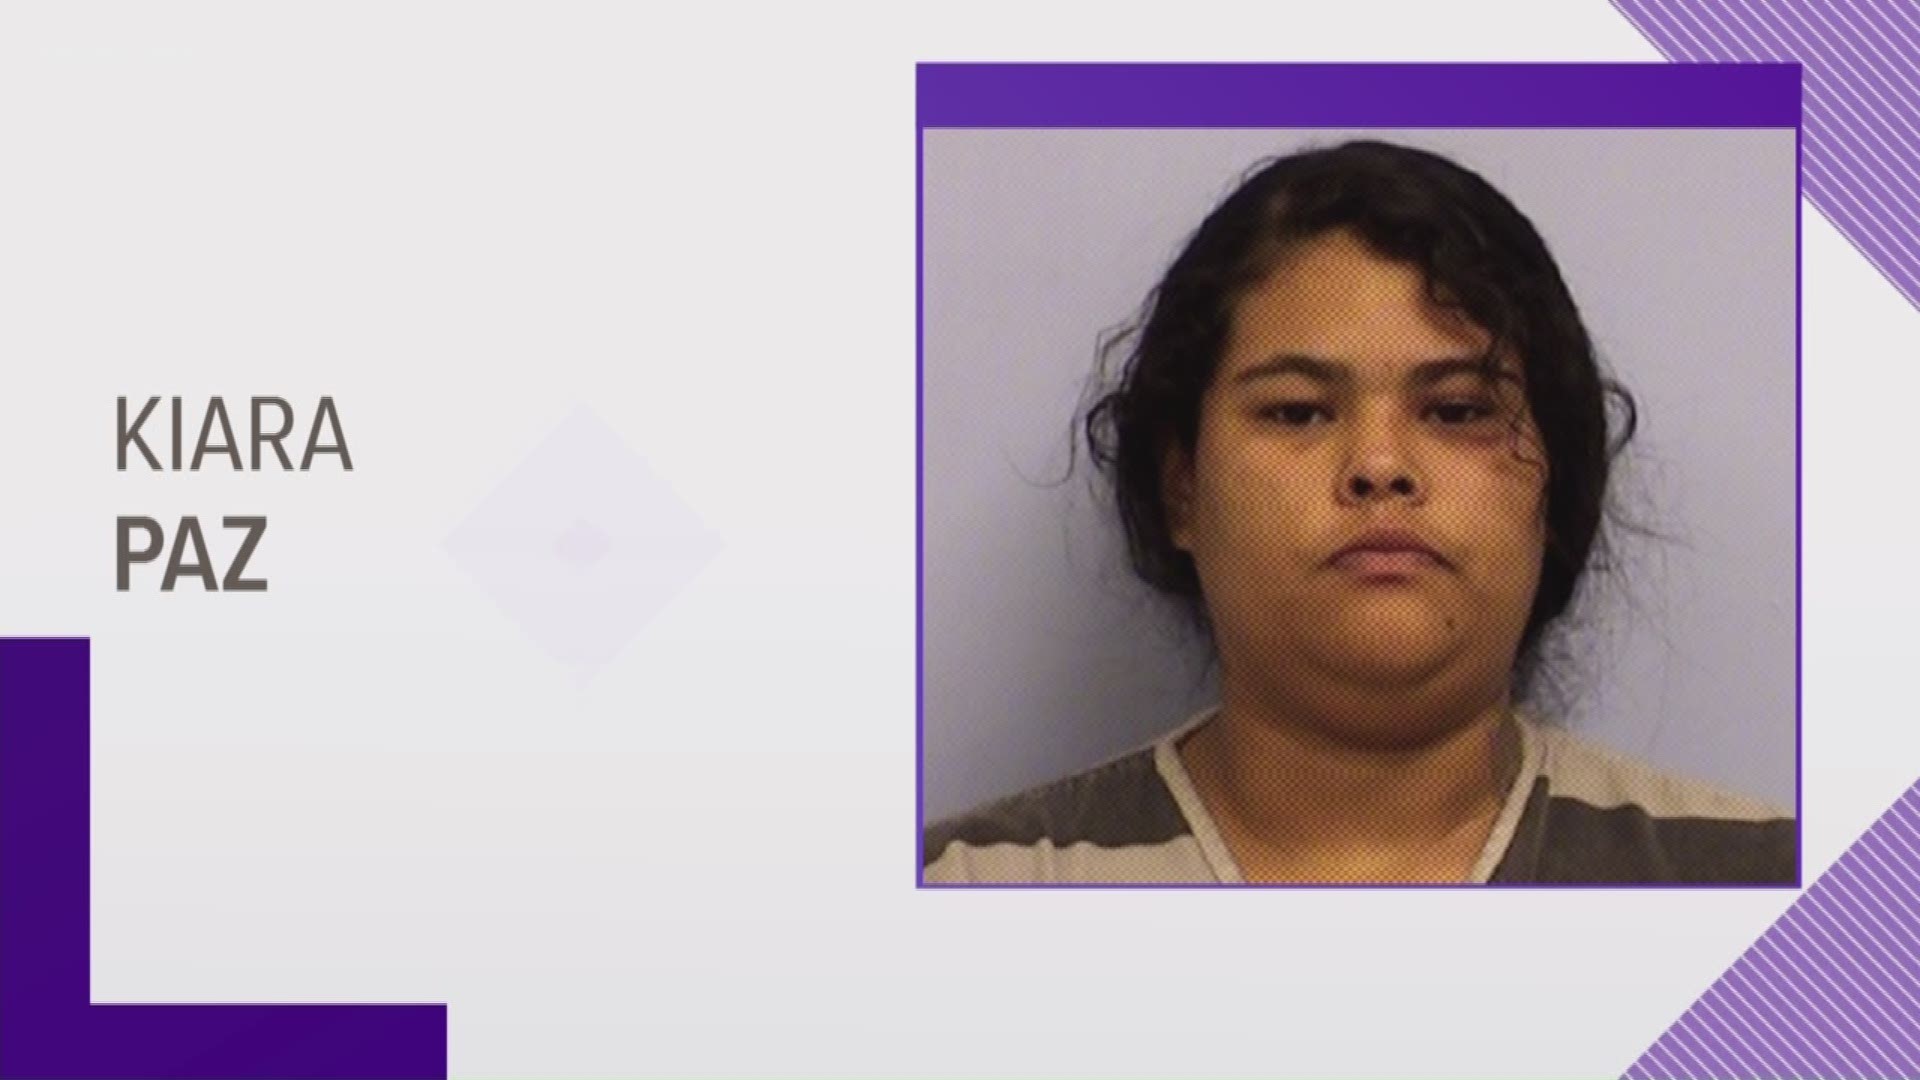 Two teens have been charged in an Austin drug-related robbery that ended with a pregnant woman being shot, killing her baby.